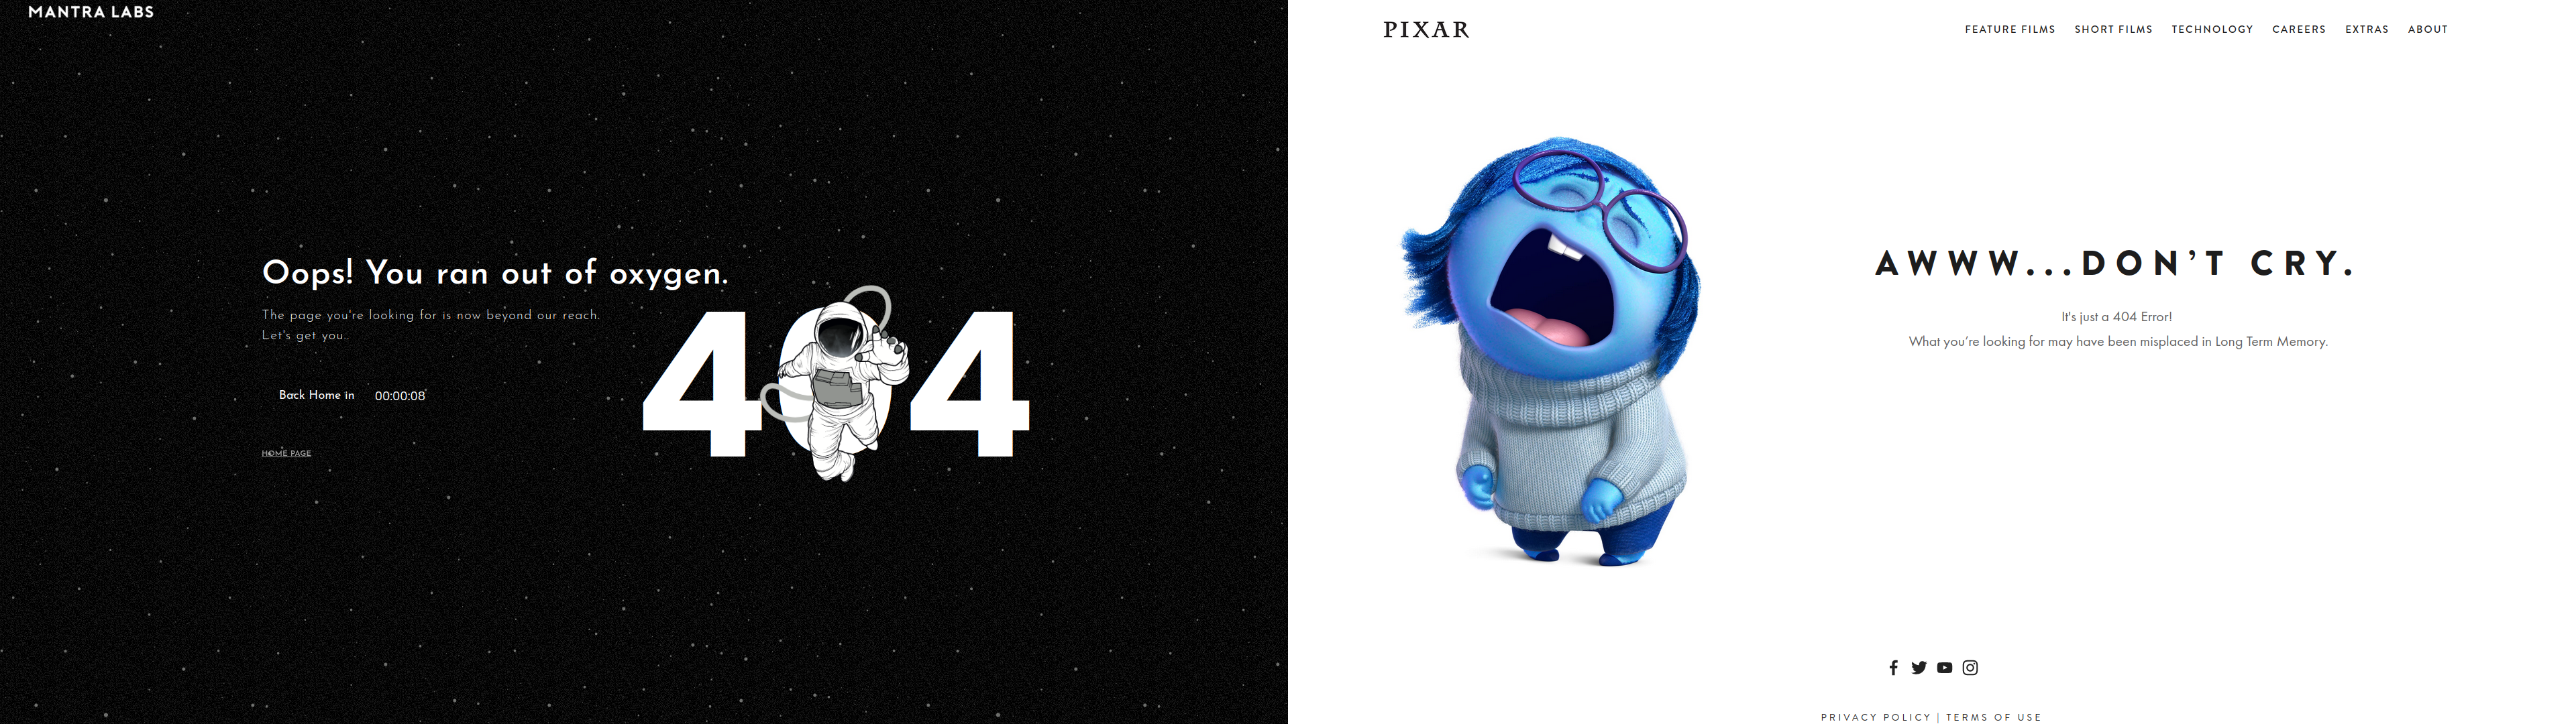 404 error pages for Mantra Labs and Pixar